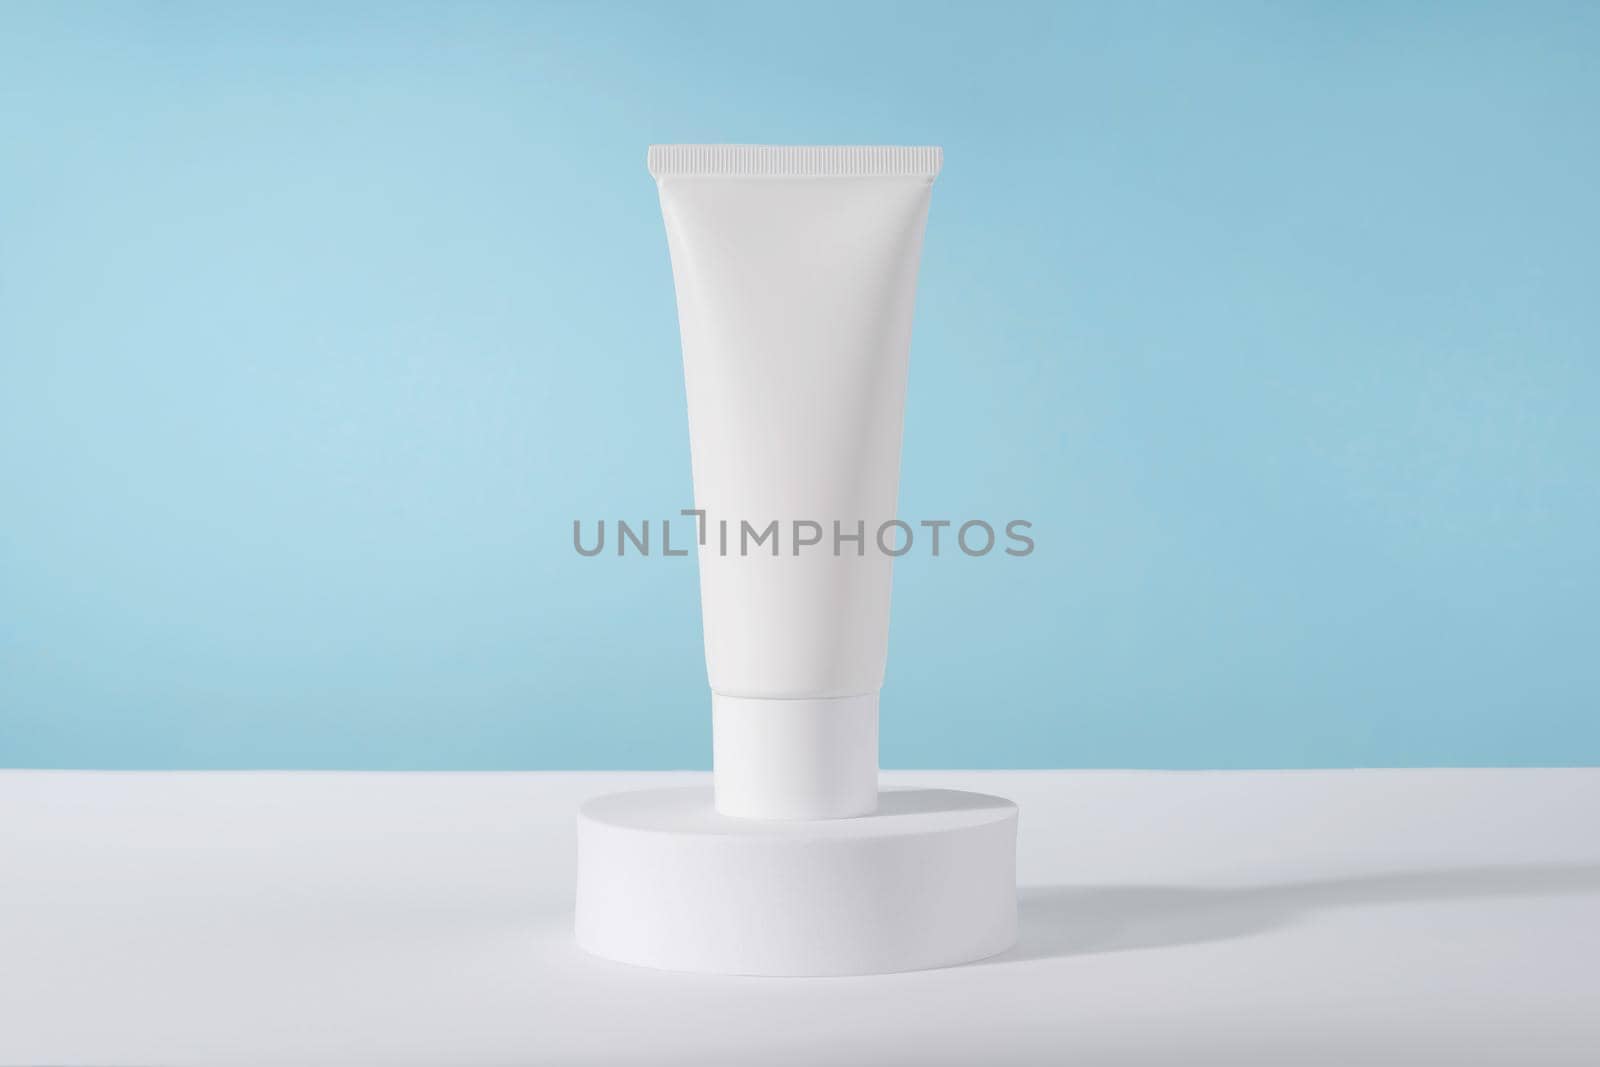 Cosmetic luxury cream tube bottle mockup on blue background on pedestal podium. Unbranded lotion beauty product packaging. Product presentation . Lotion, mousse, cleanser for skincare routine by photolime